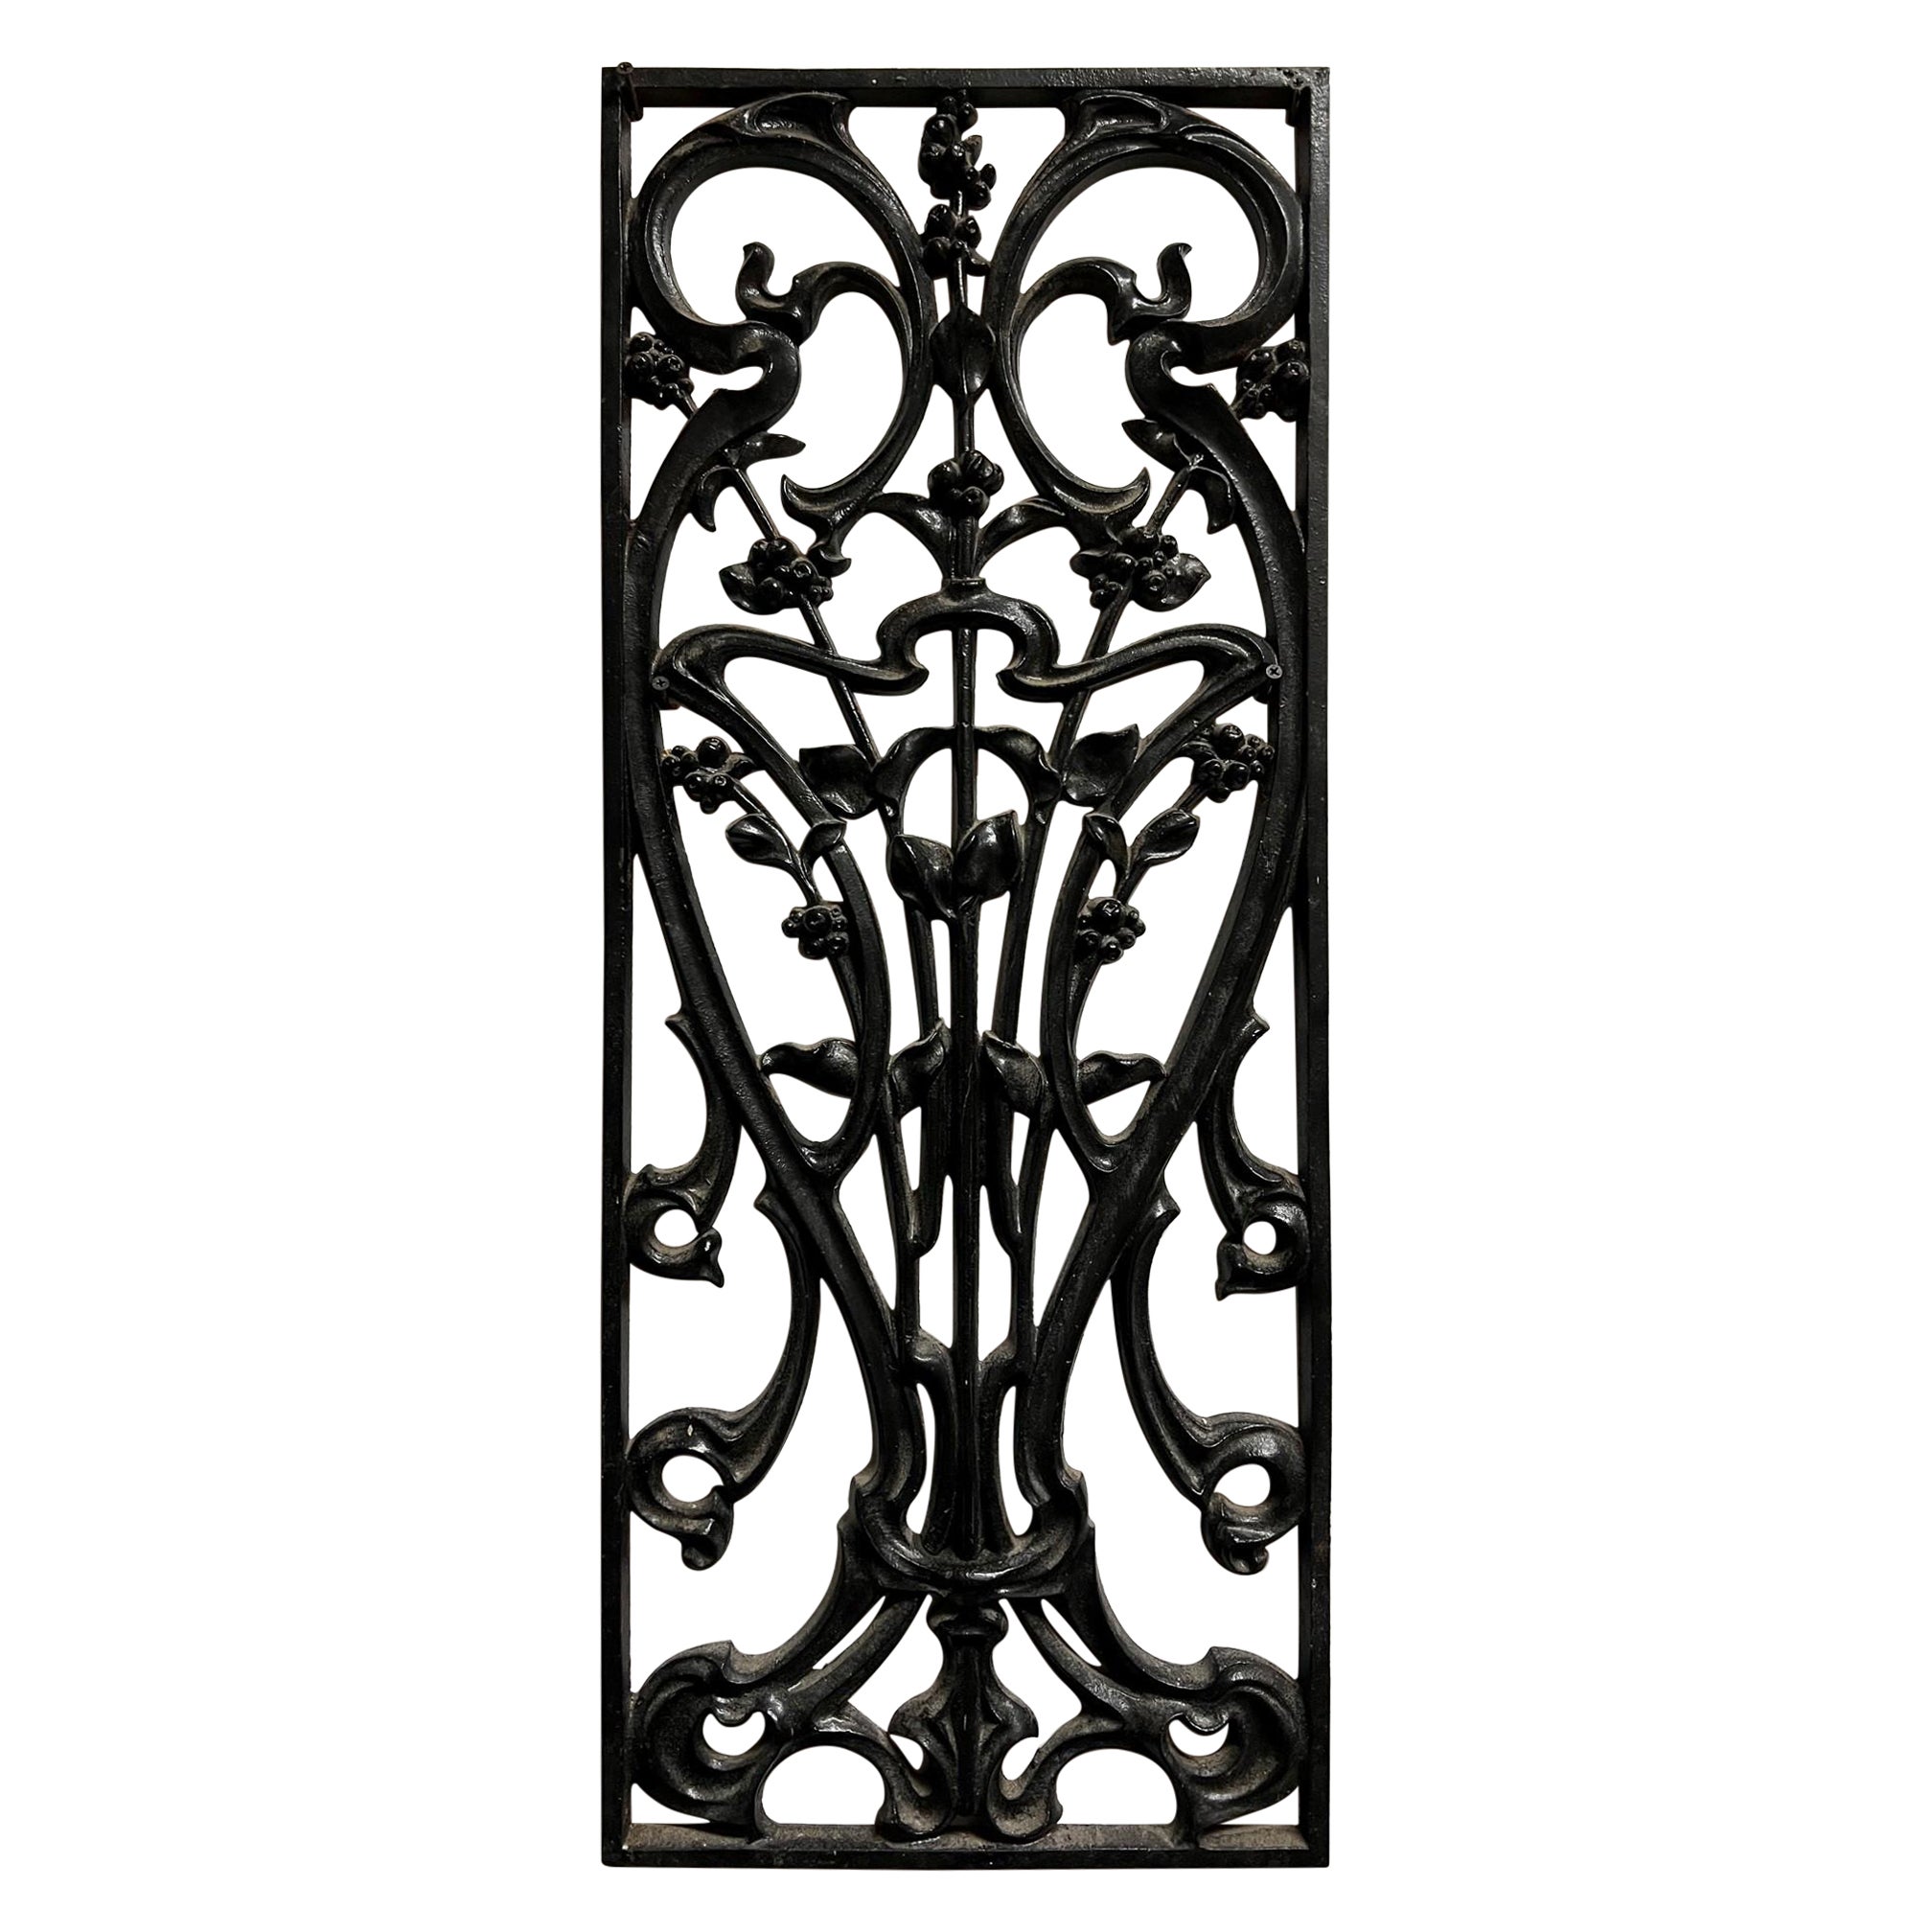 Early 20th Century Antique French Art Nouveau Iron Panel from Paris France